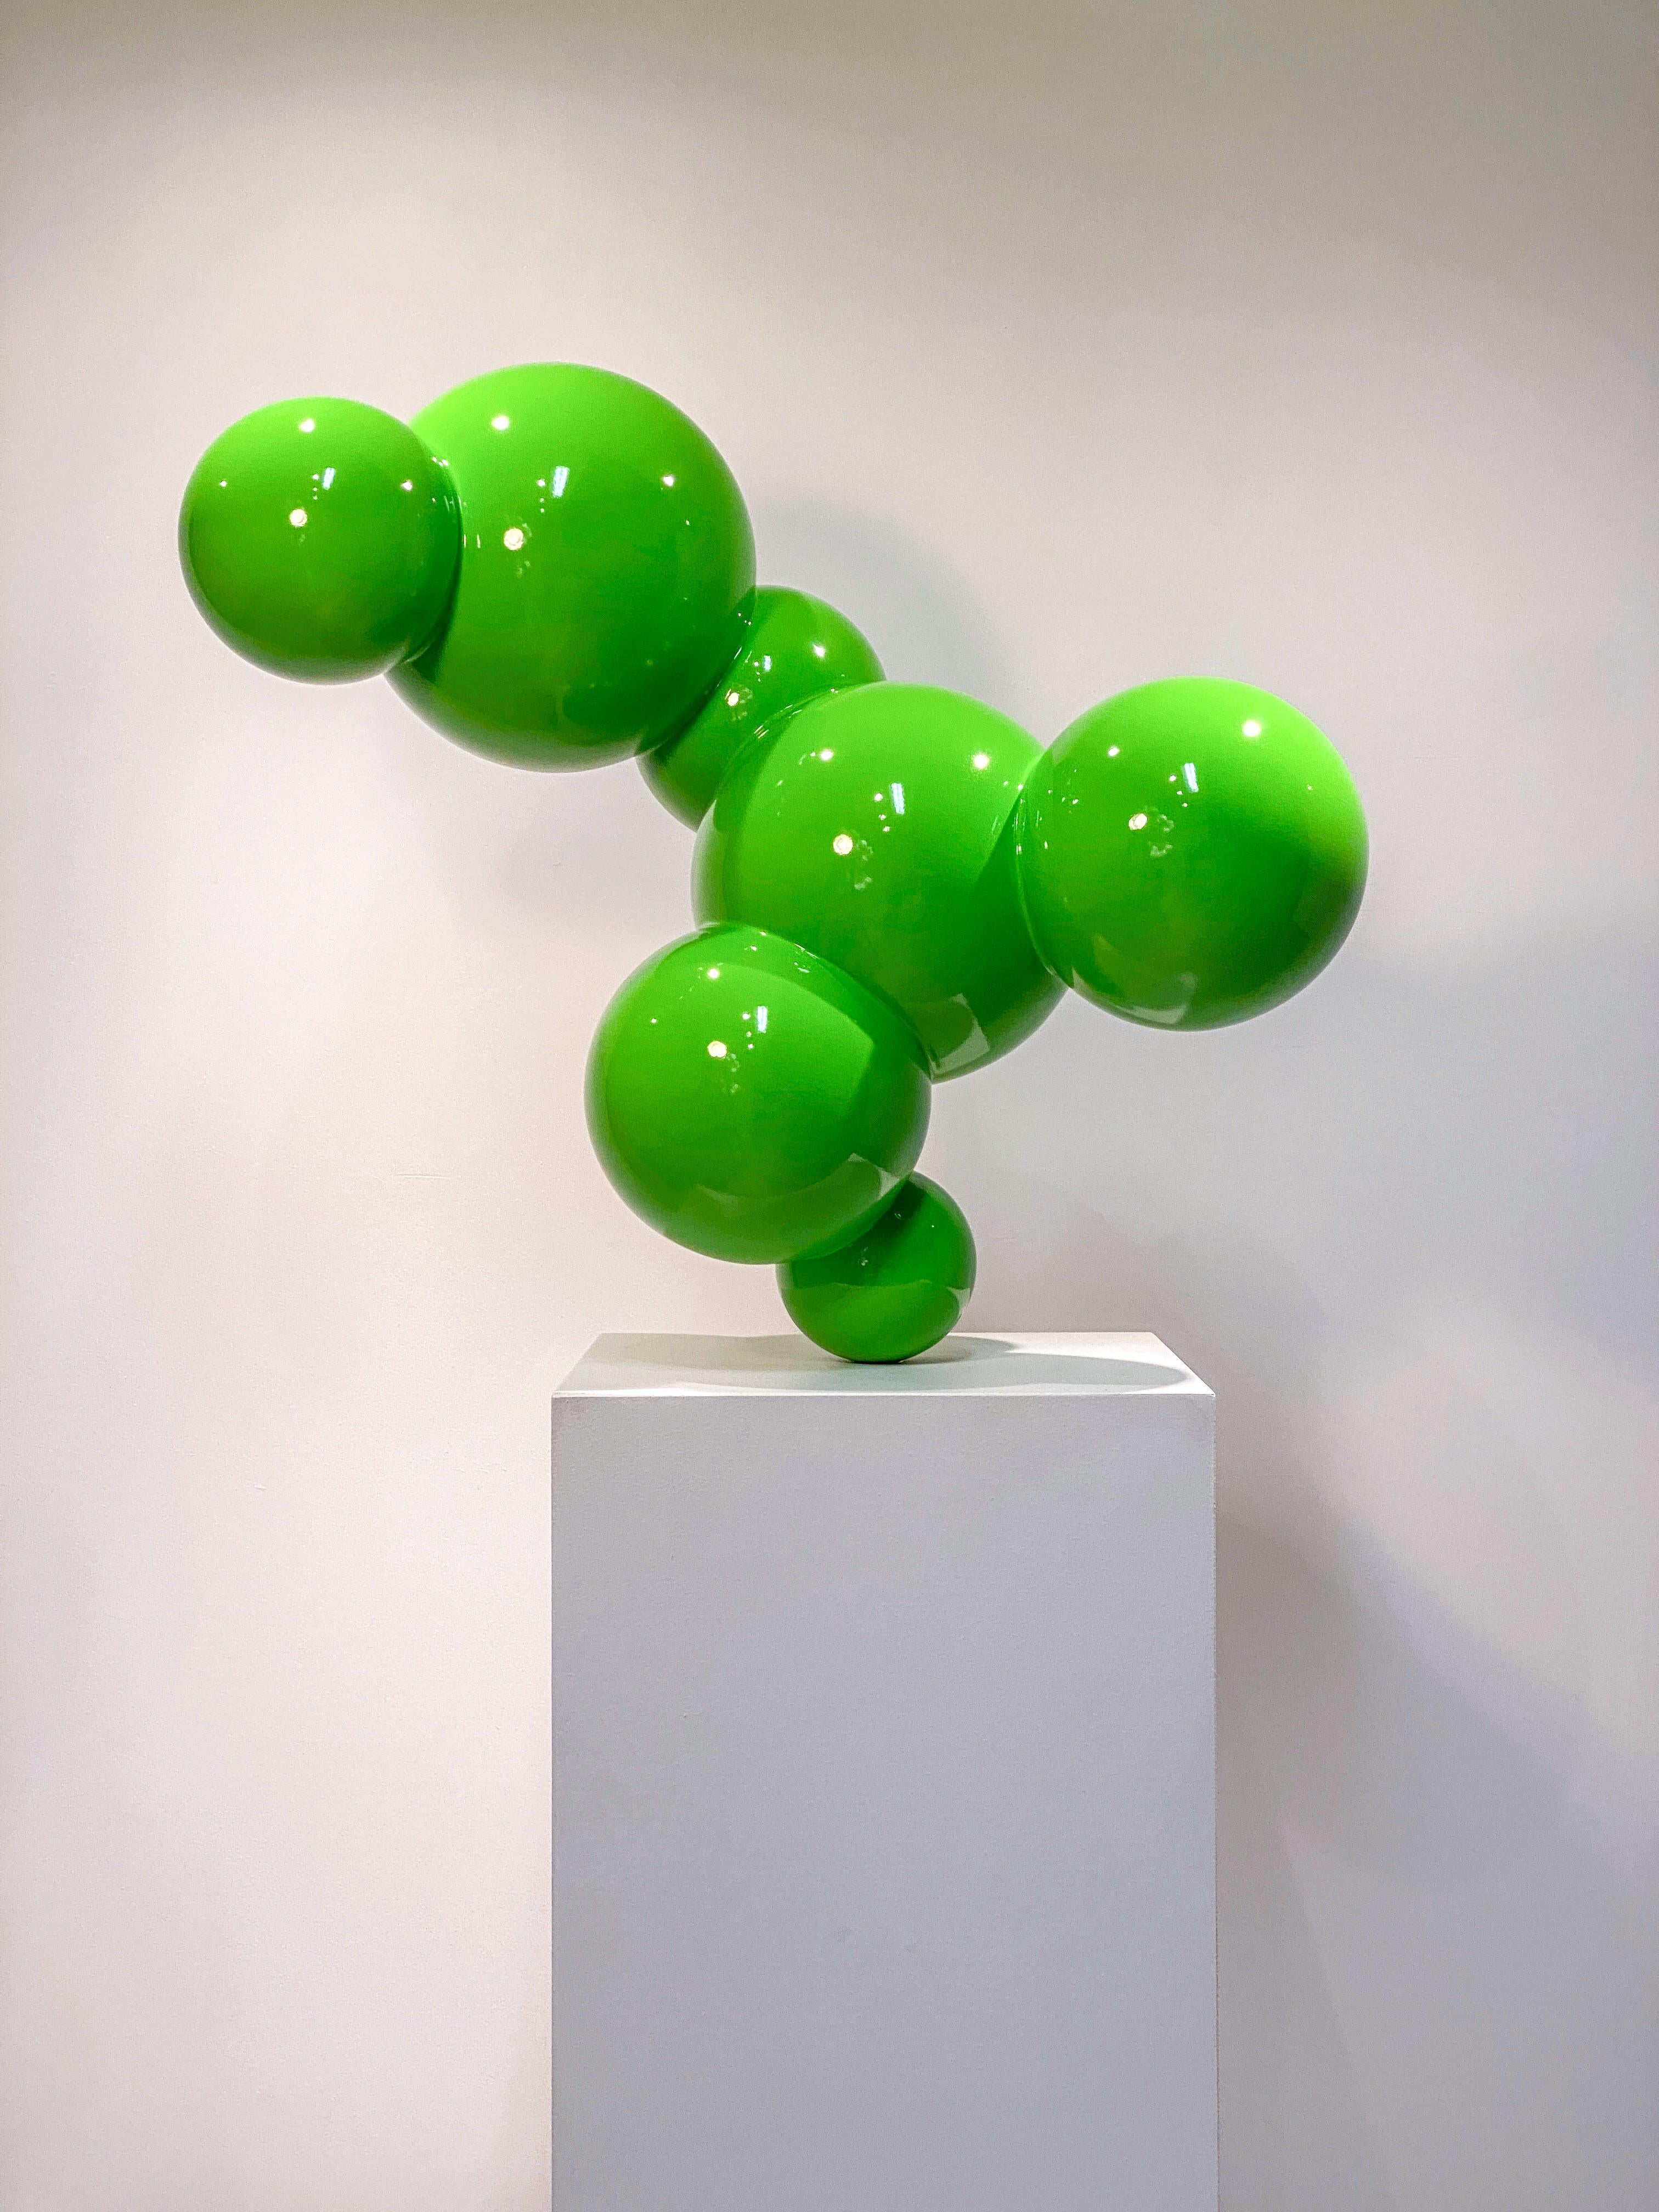 Alexander Caldwell creates uniquely pop art-inspired contemporary sculptures. He has acquired an international reputation for creating playful pieces whose minimalist form is amplified by bold colours. This indoor stainless-steel sculpture coated in